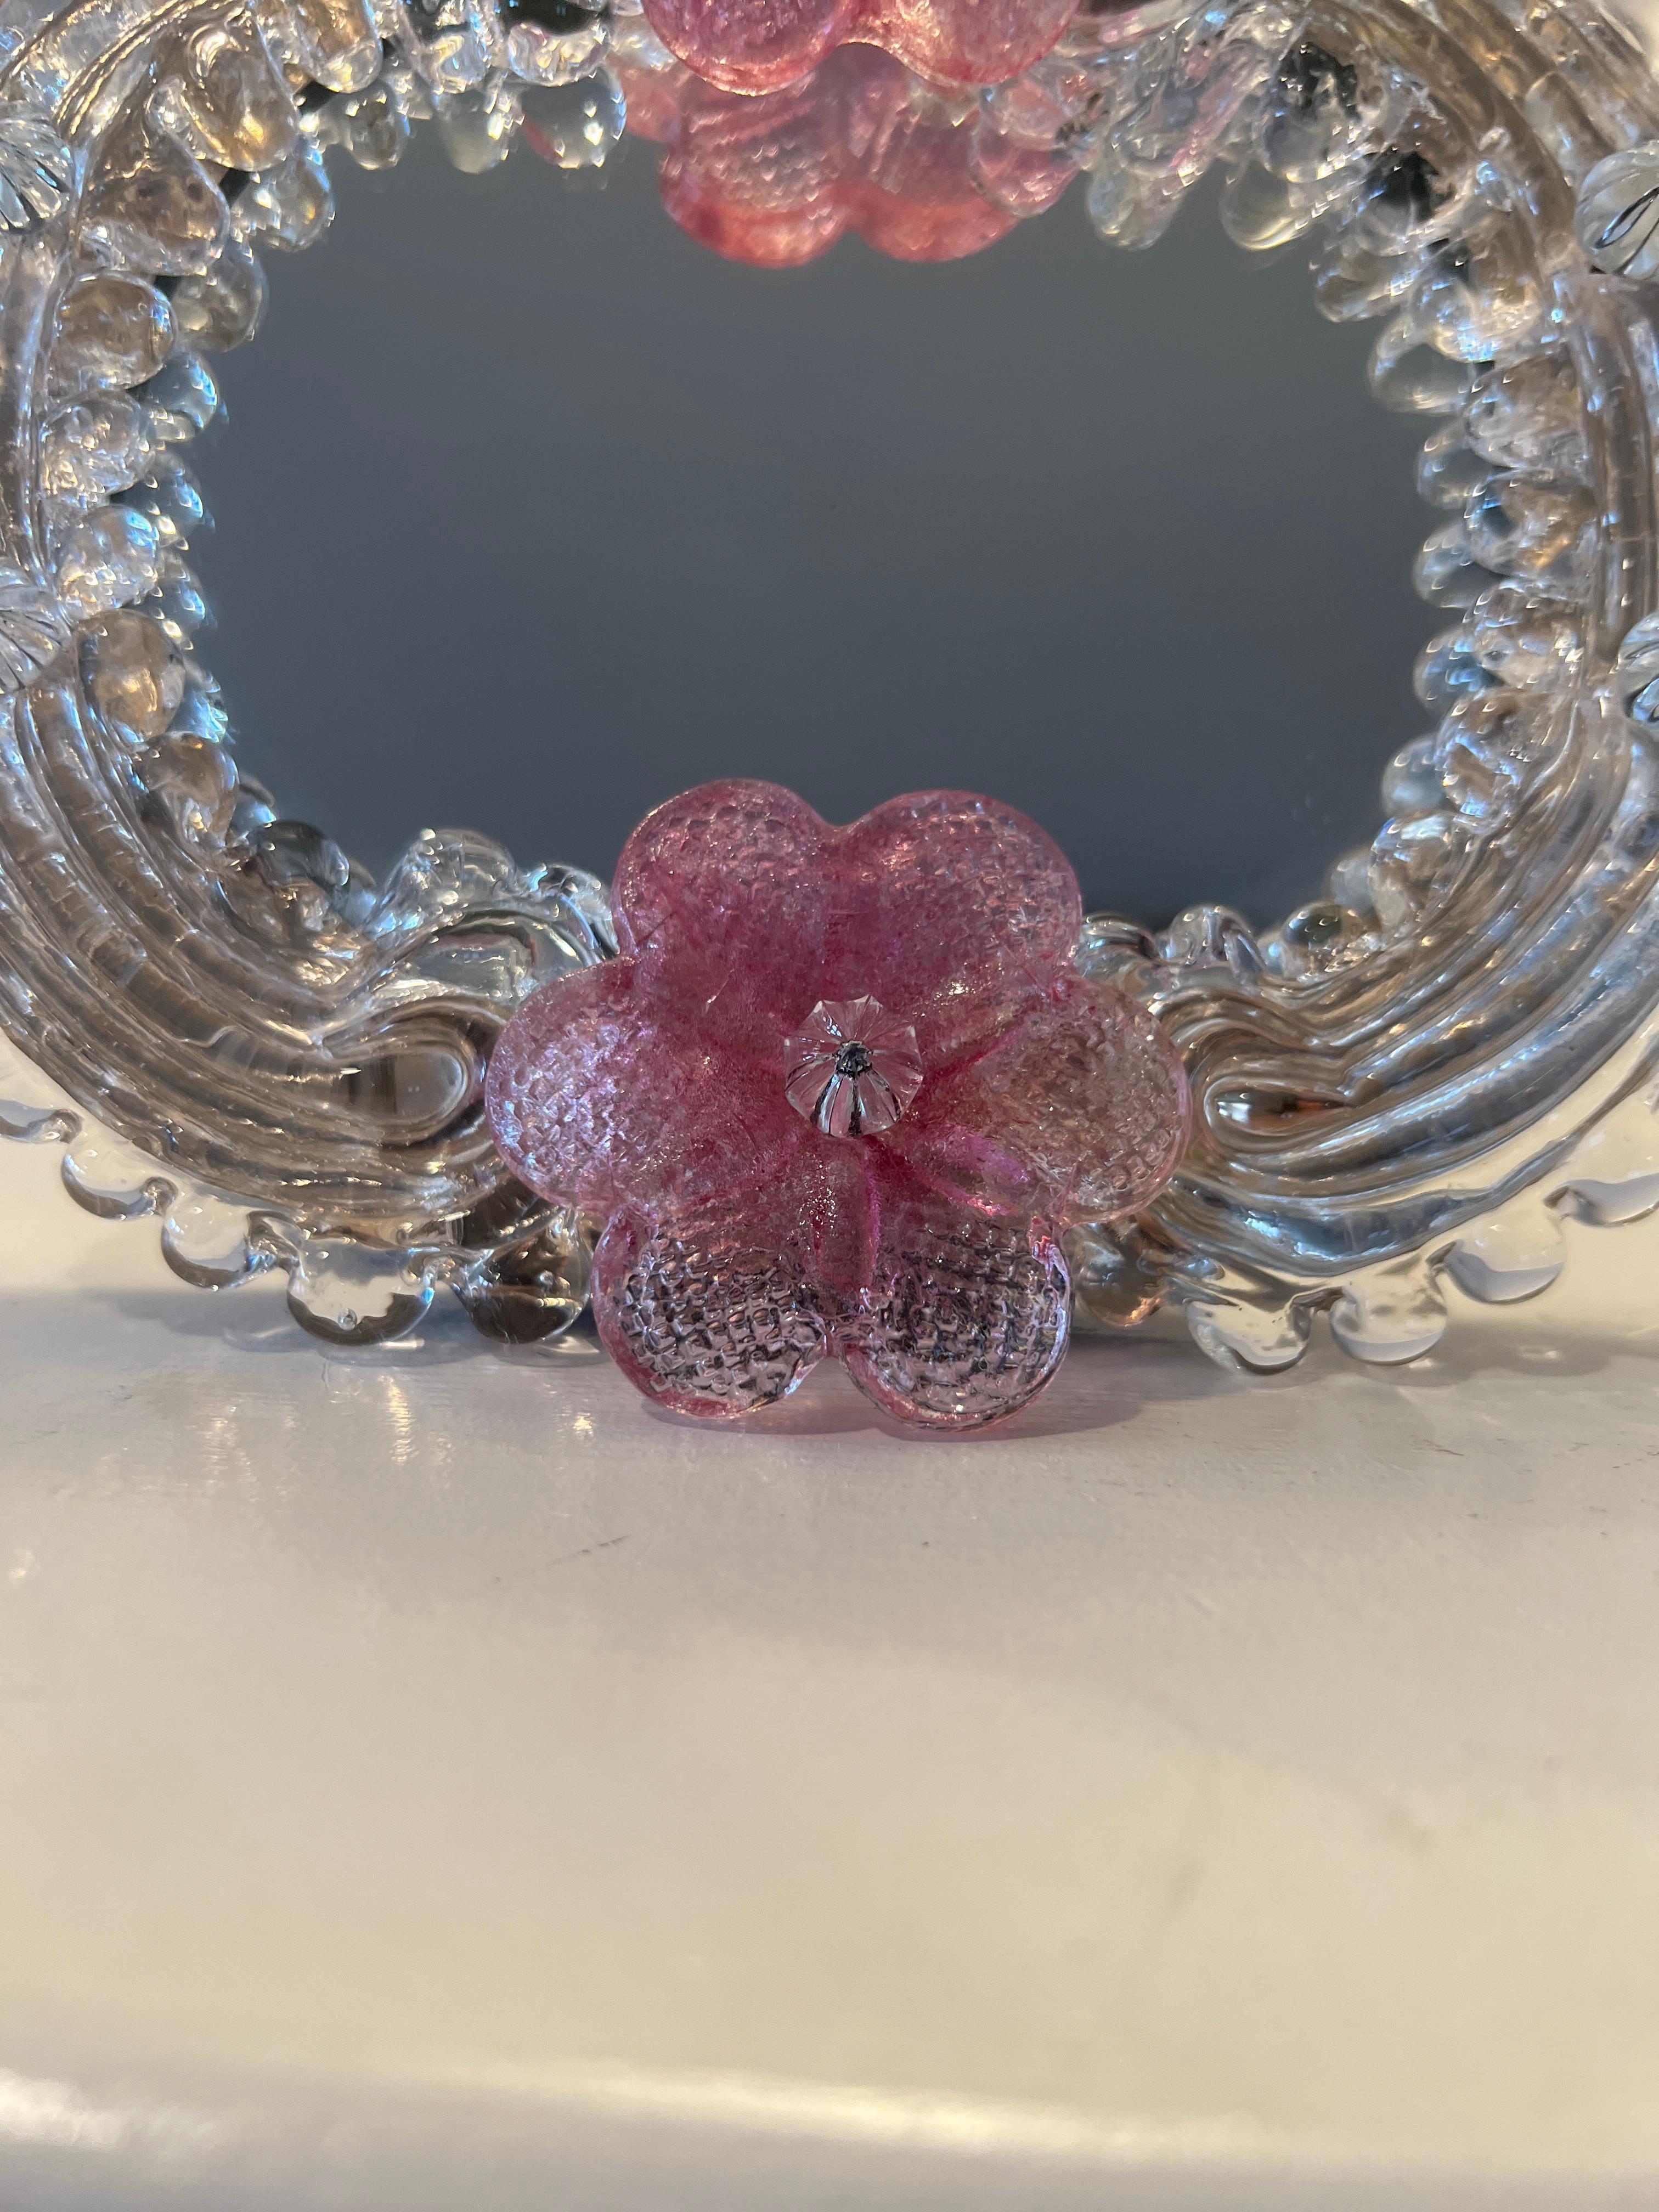 Venetian, mid 20th century.

A petite art glass mirror made with two pink Venetian glass florets mounted to around a gold freckled scalloped edge frame. Verso has a stand for using on table top and a hook for wall use. Unmarked.  